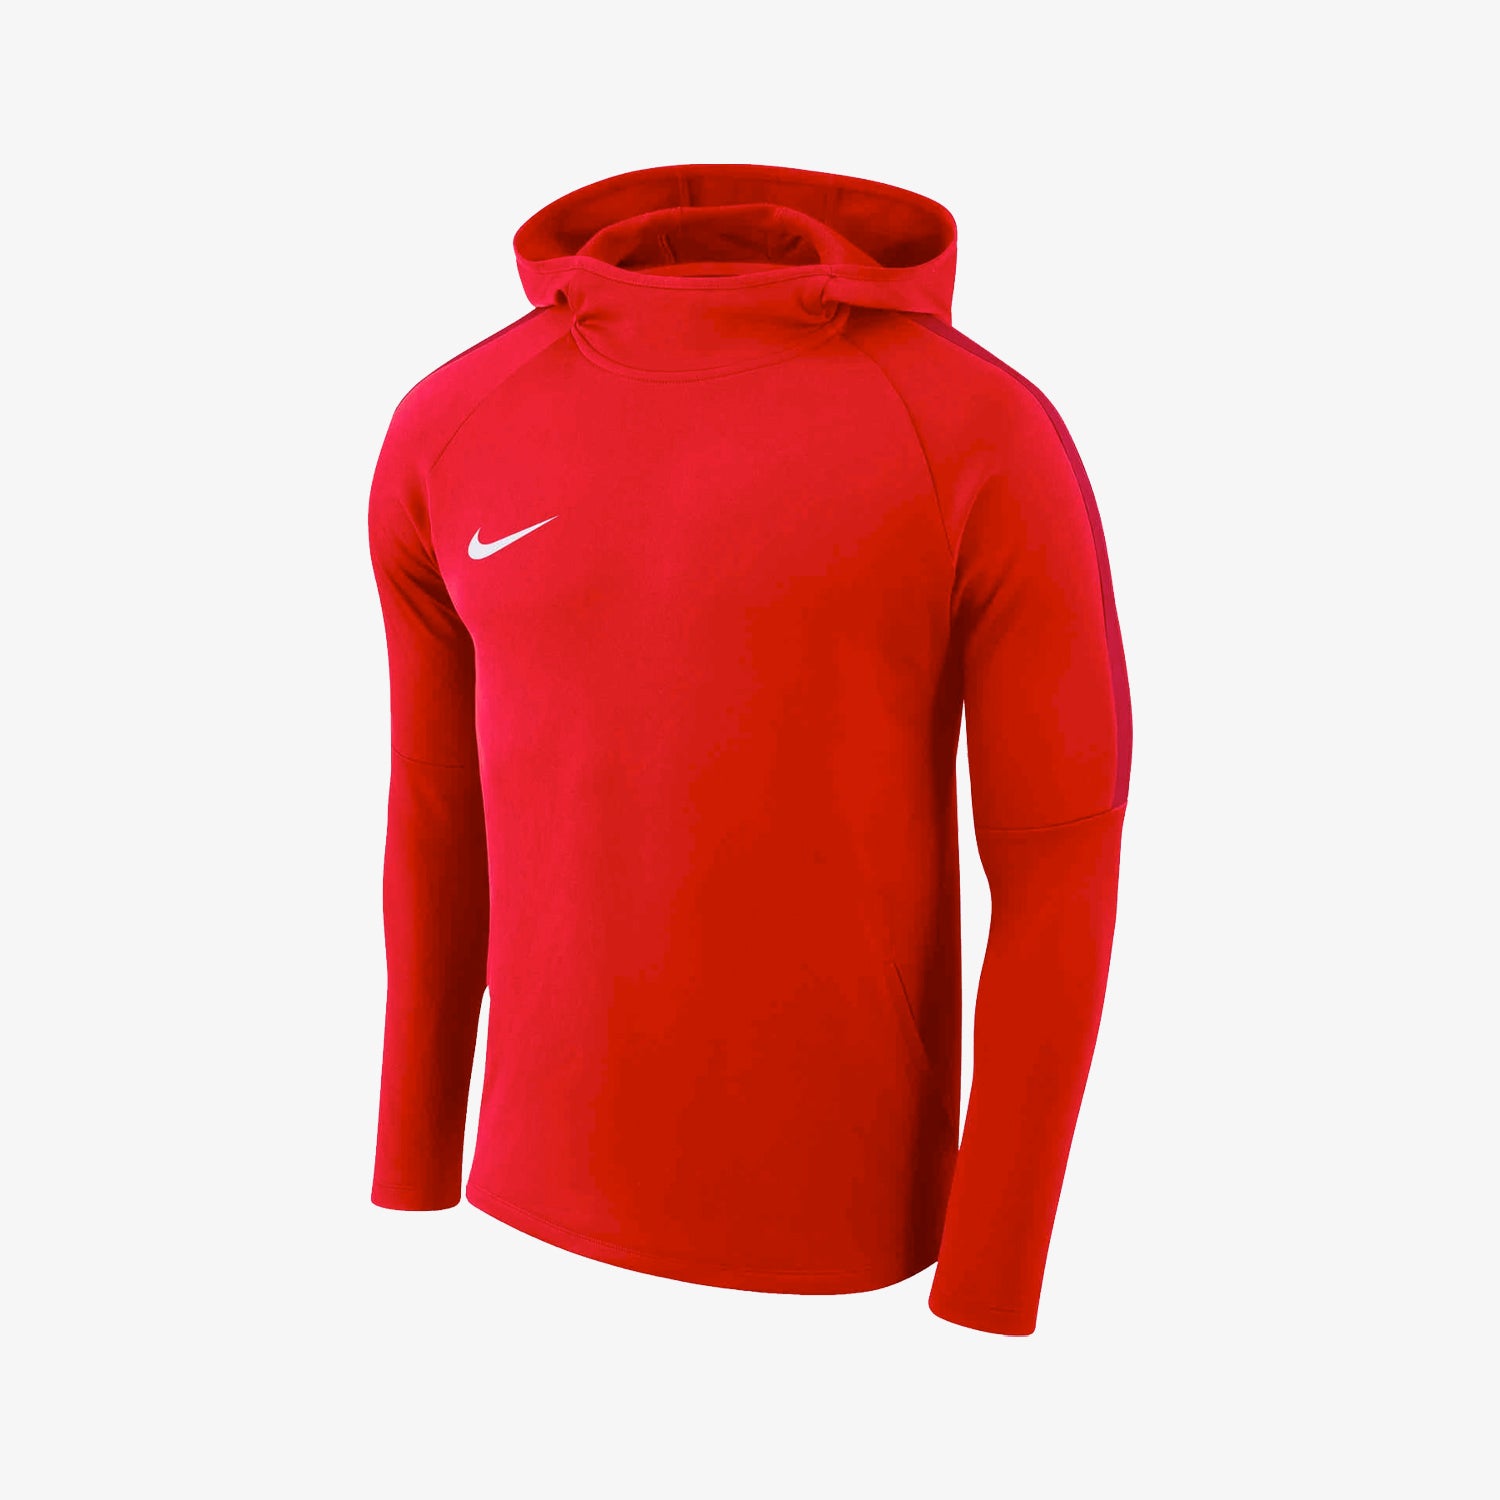 Academy 18 Red